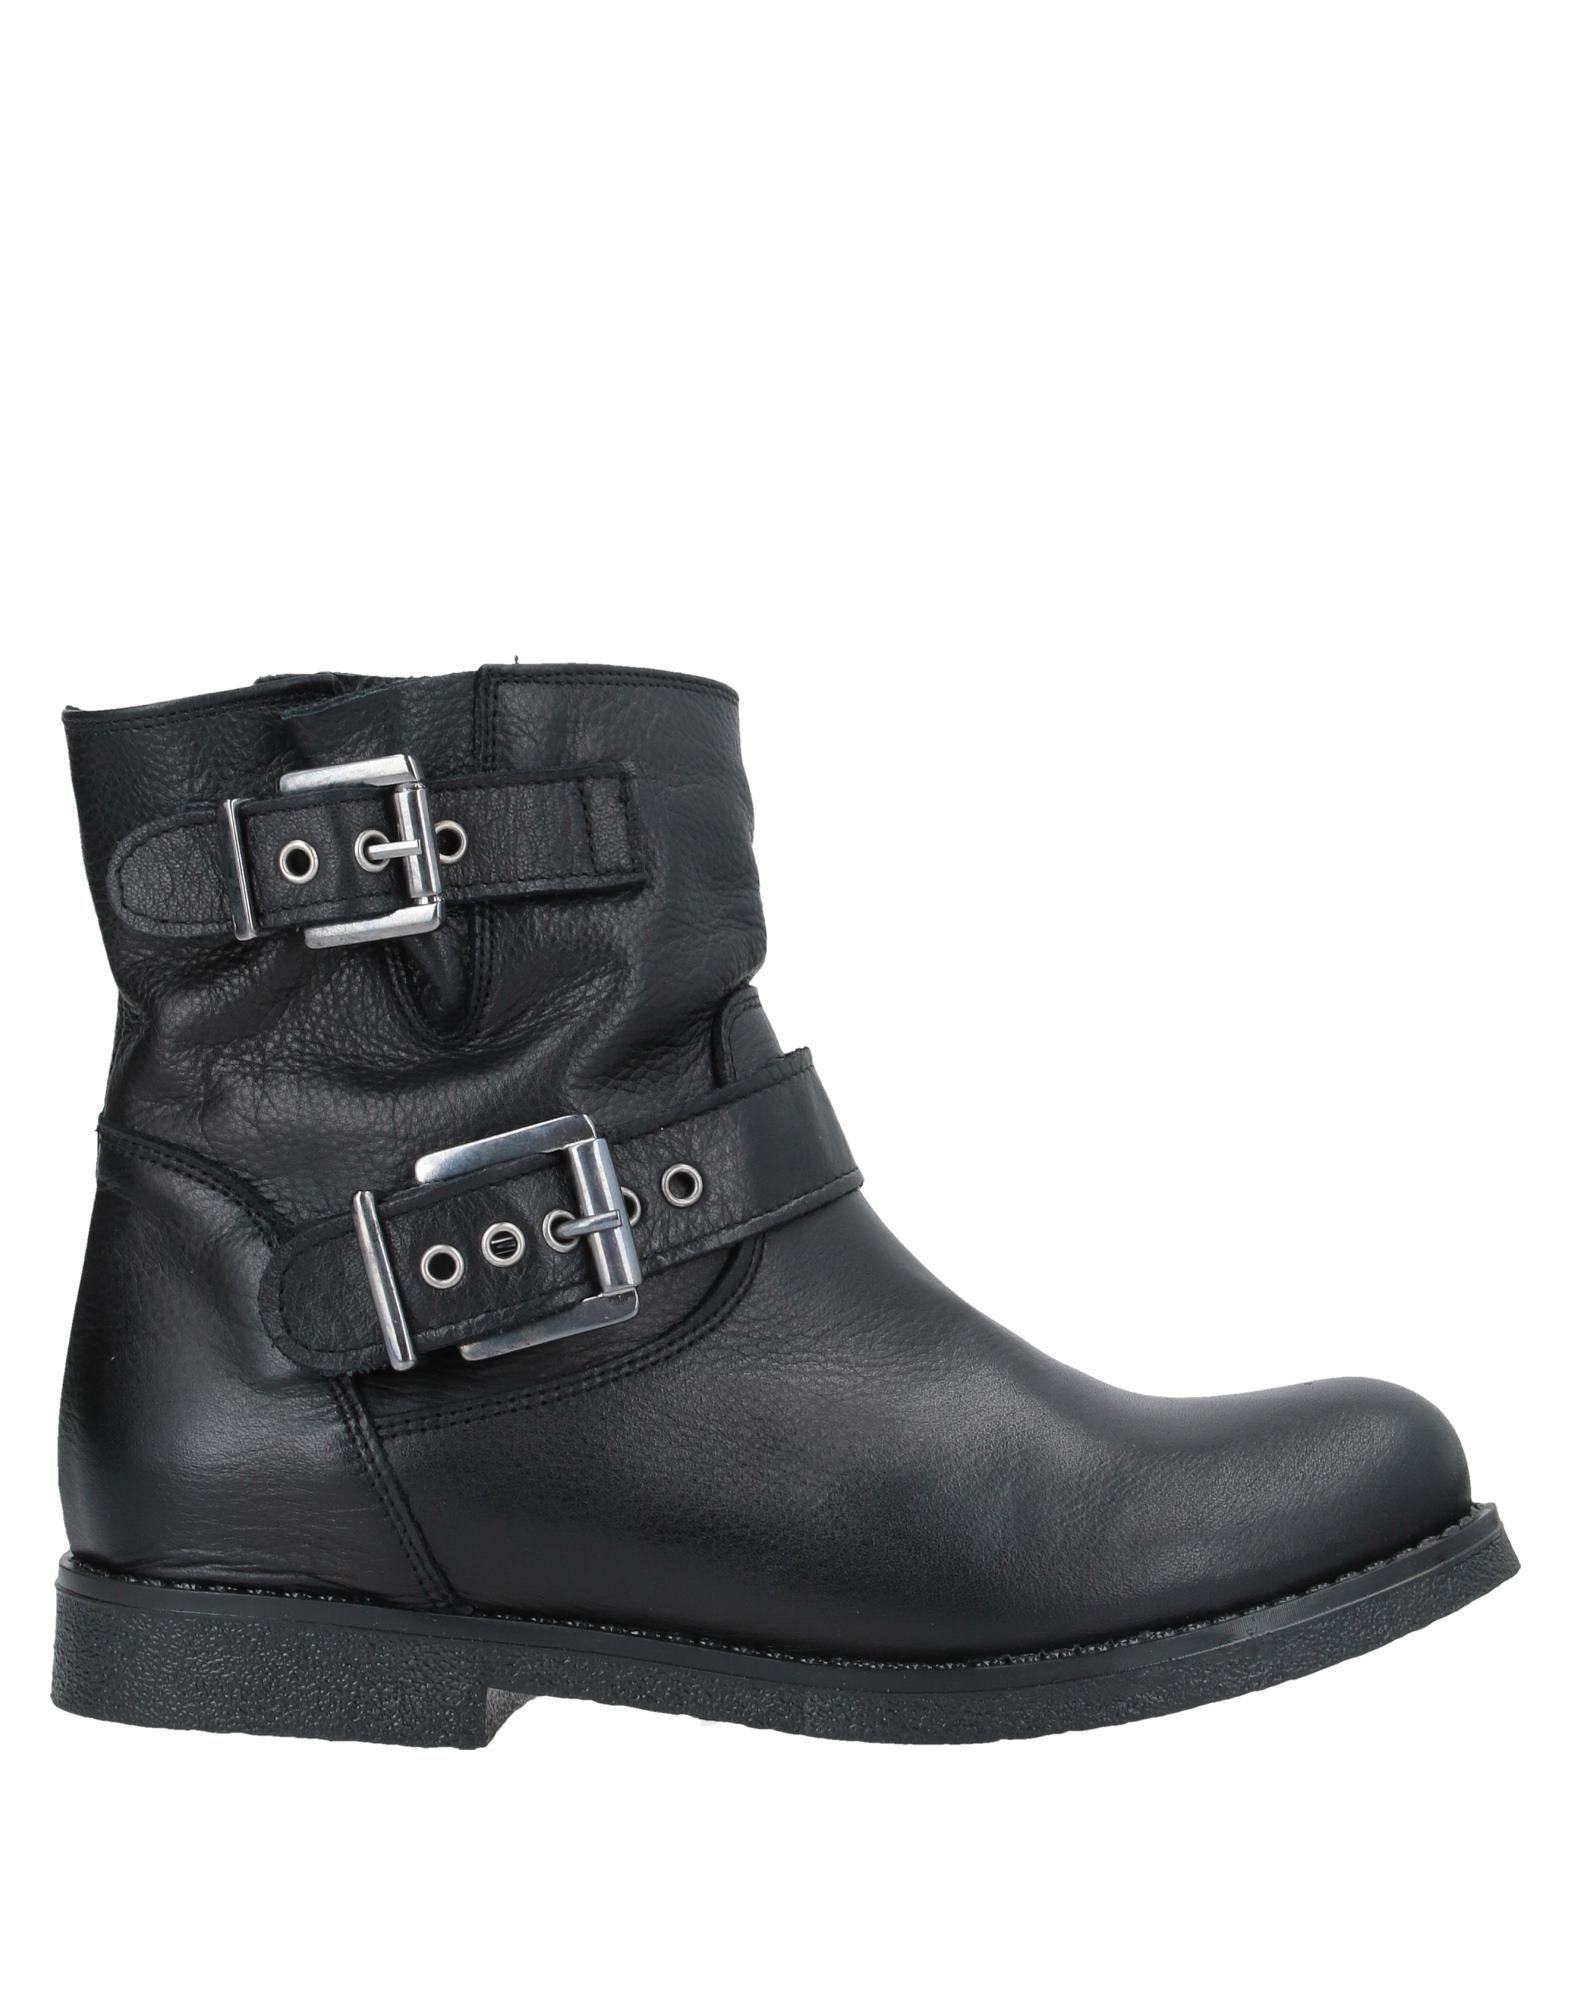 Ovye' By Cristina Lucchi Ankle Boots in Black - Lyst